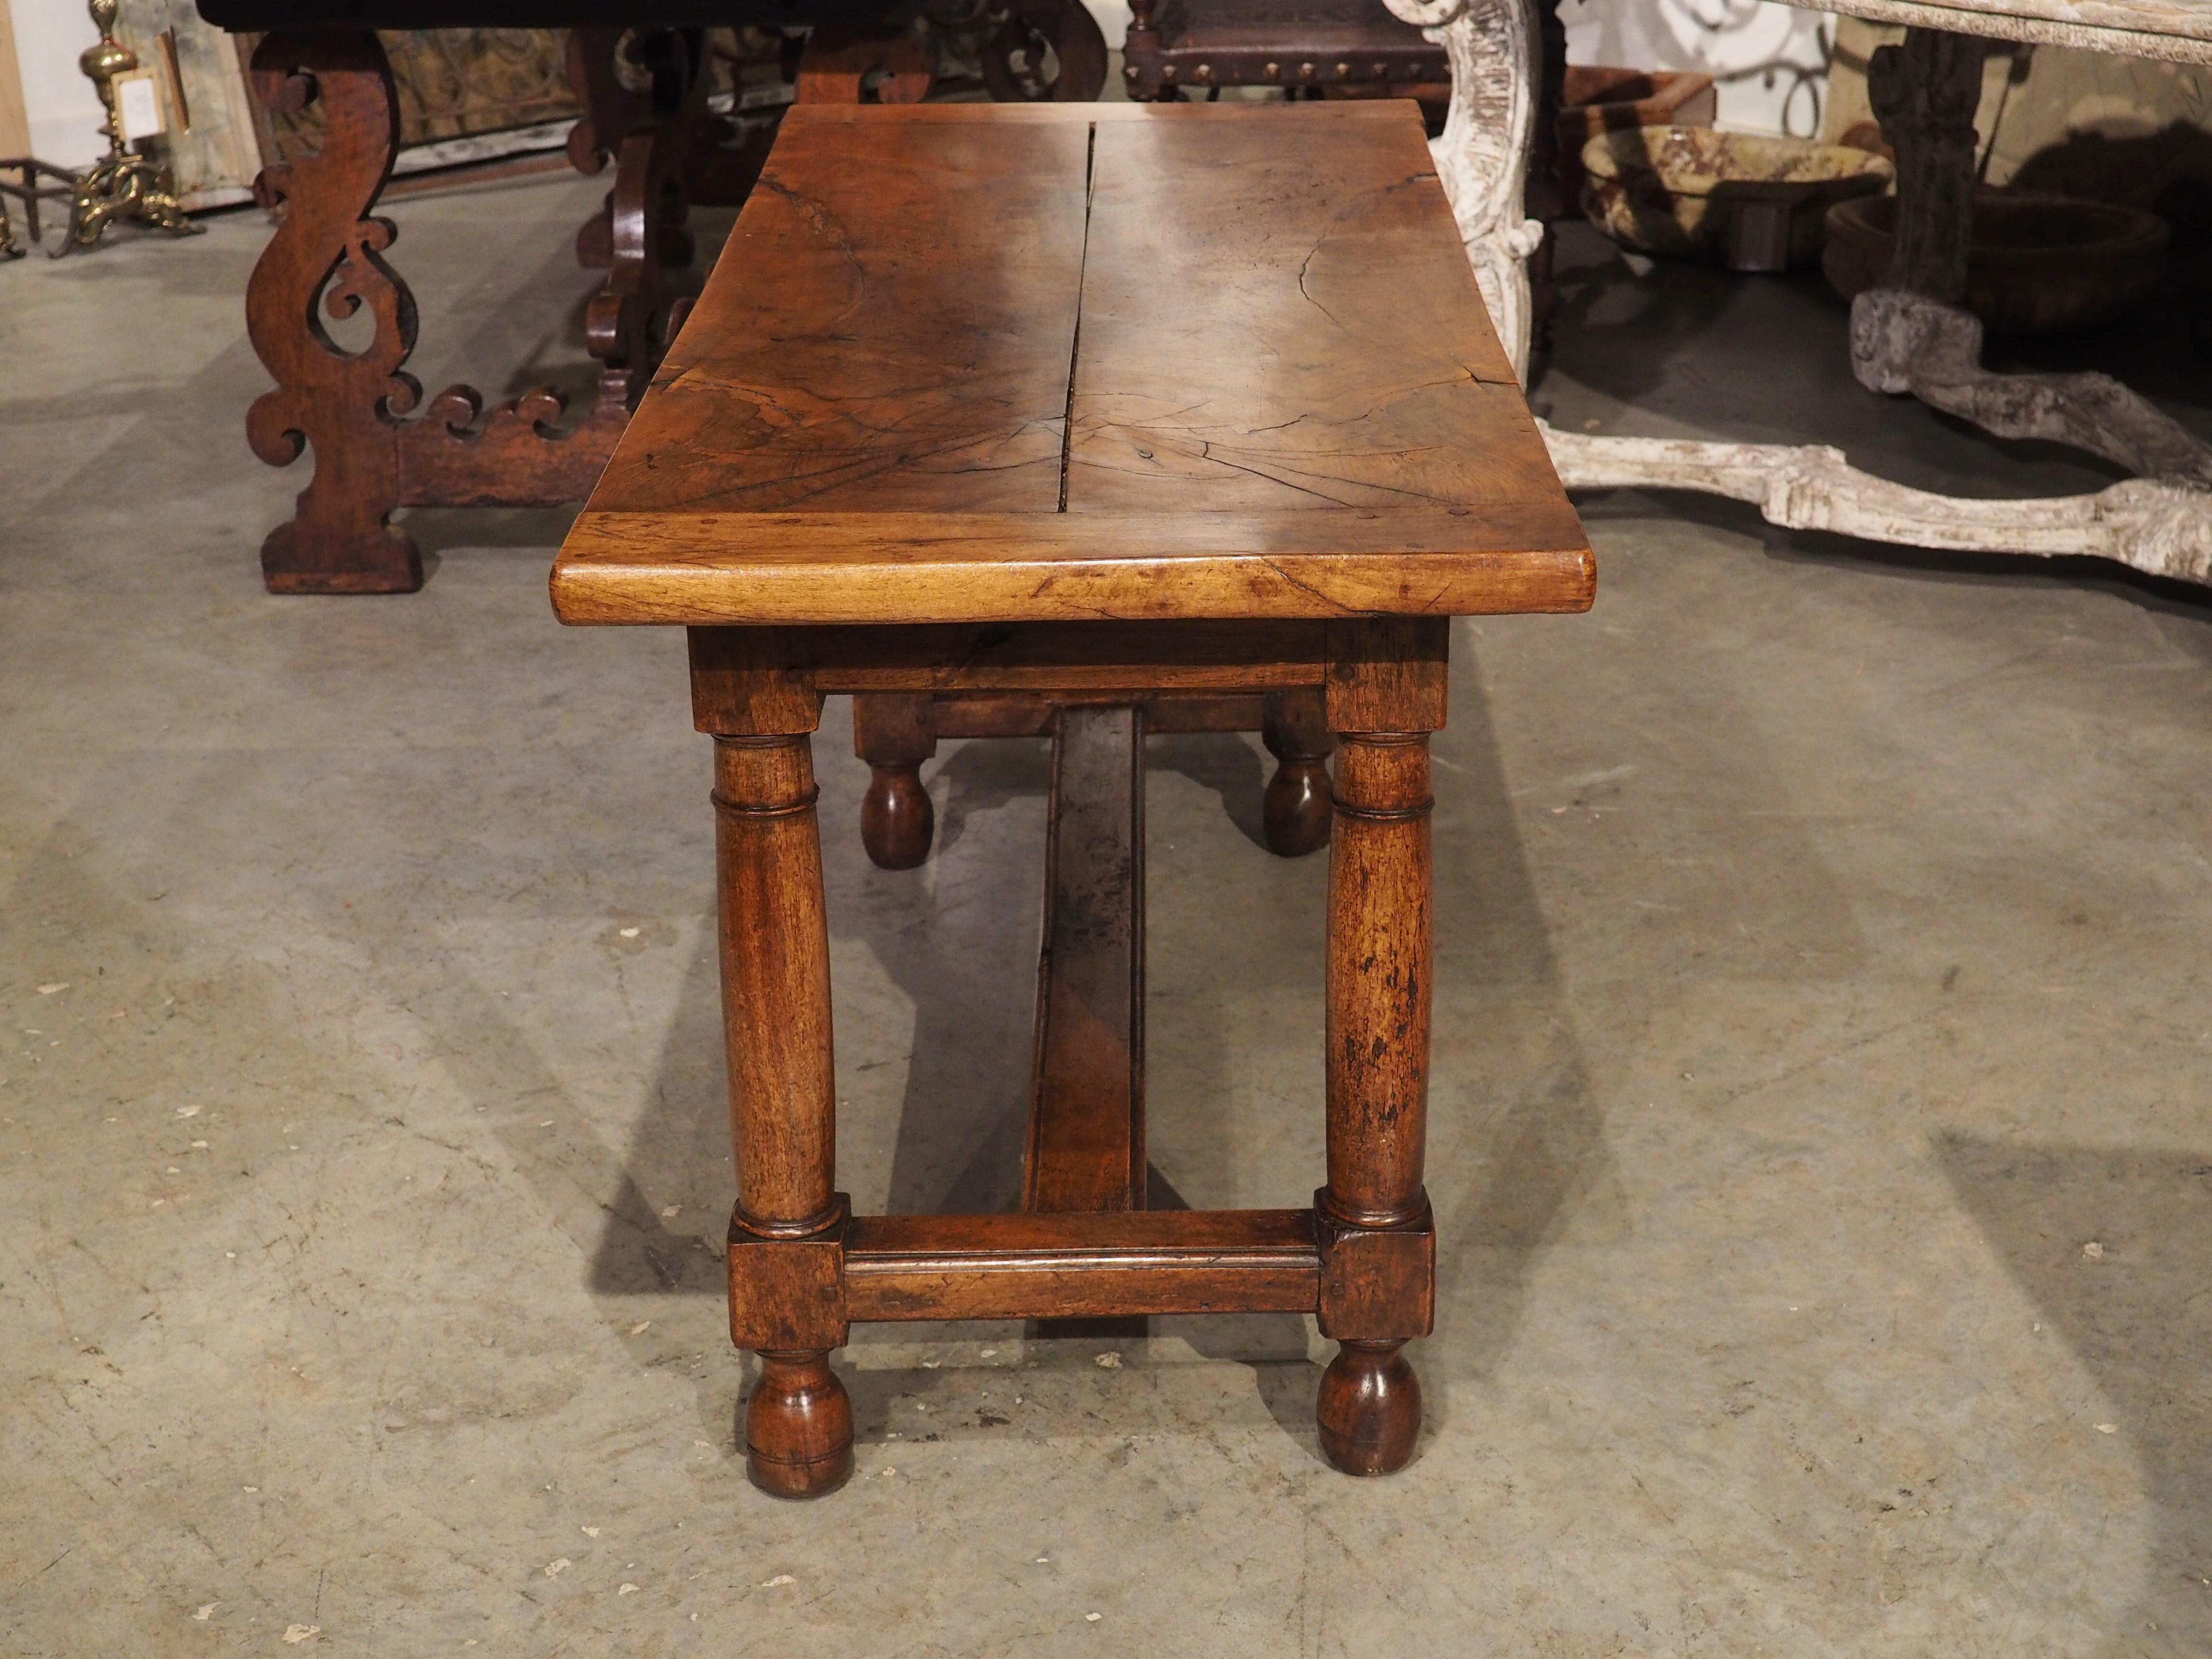 Wood 19th Century Single Burl Walnut Plank Table from Normandy, France For Sale